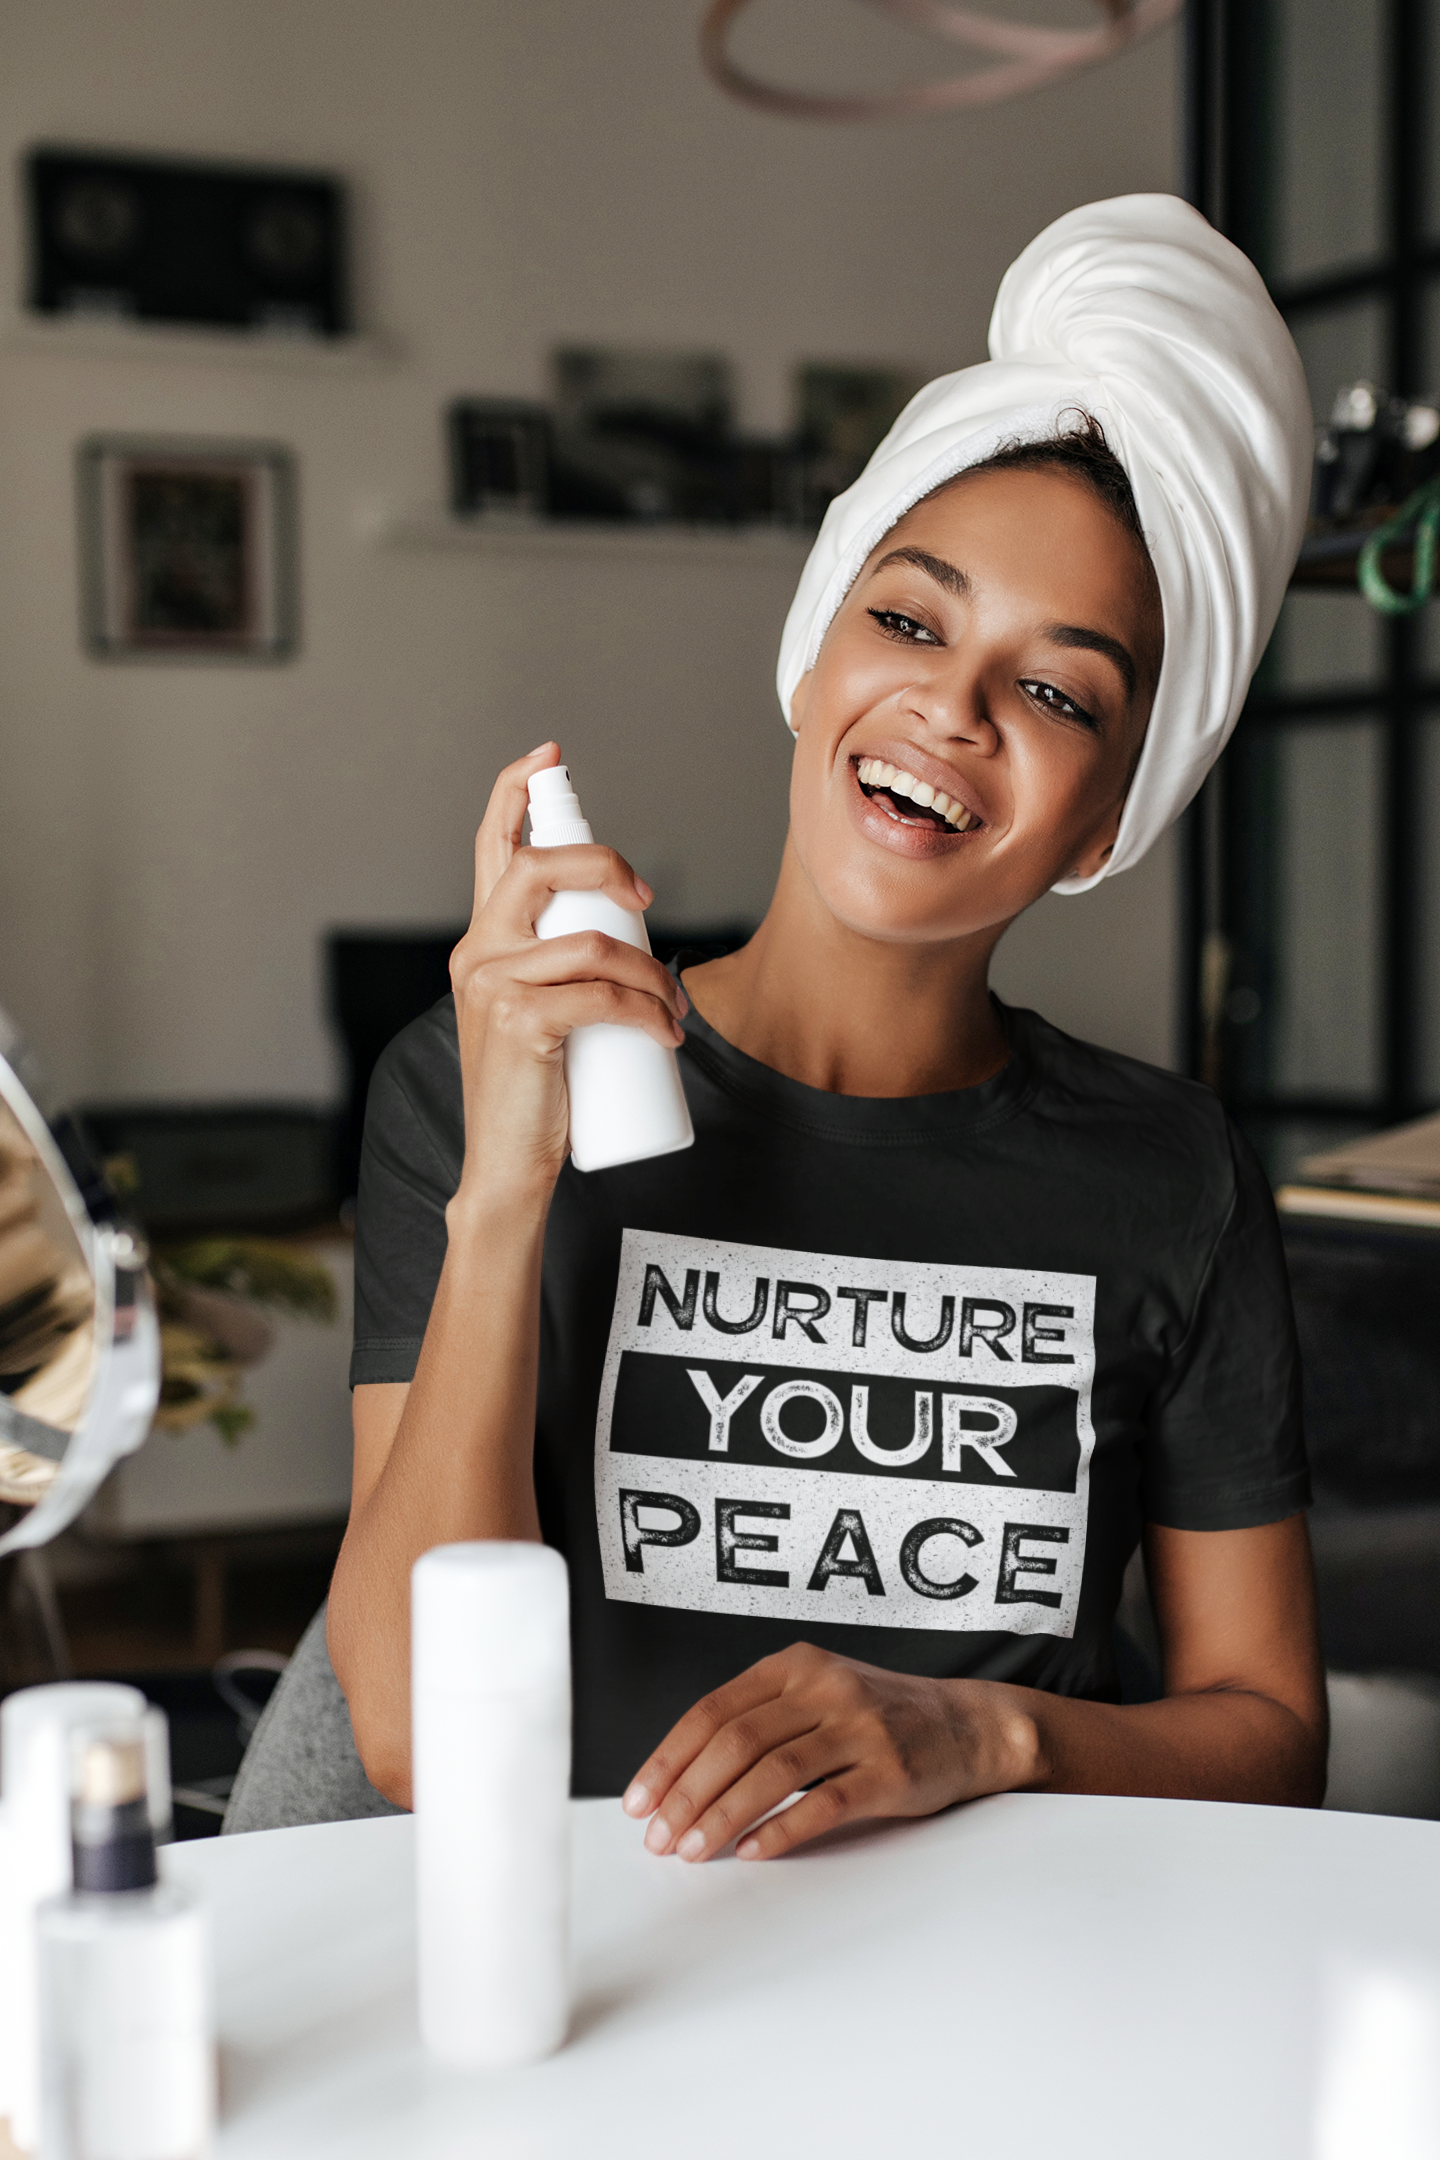 Nurture-Your-Peace-tshirt-unisex-round-neck-t-shirt-mockup-of-a-happy-woman-doing-a-skincare-routine-m11934-r-el2.png